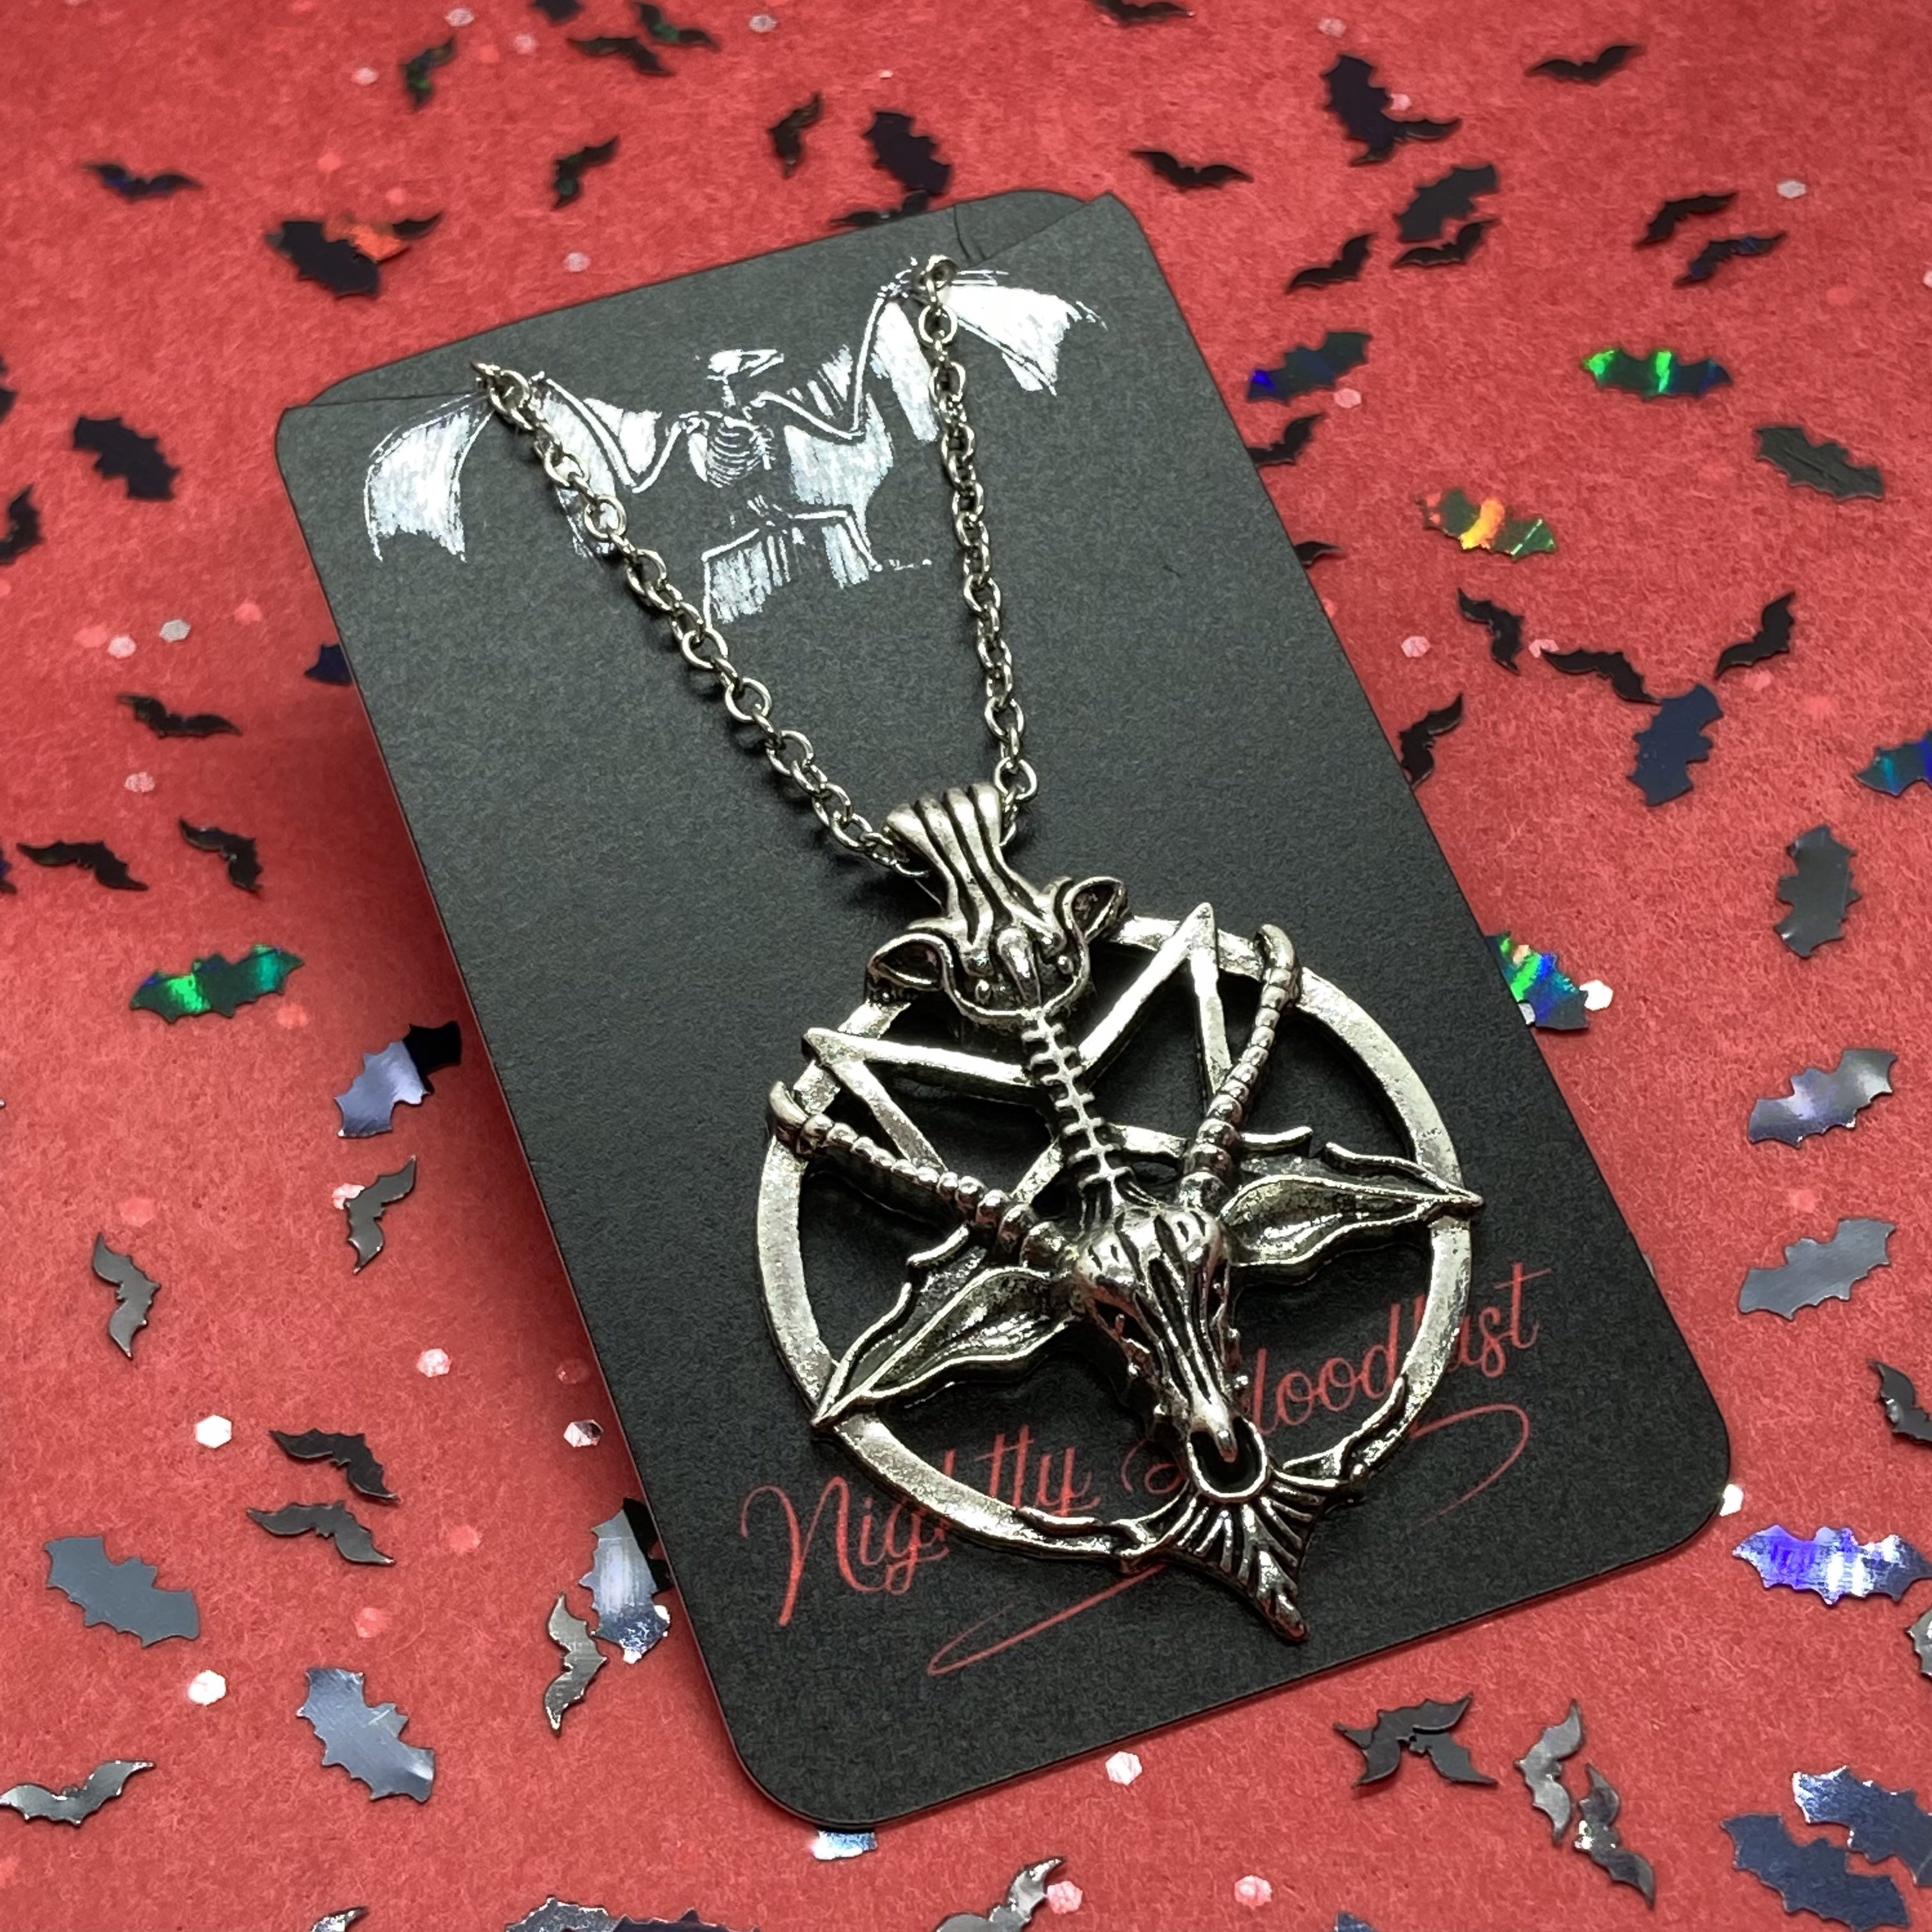 Good product low price free delivery worldwide New Moon Necklace,Occult ...